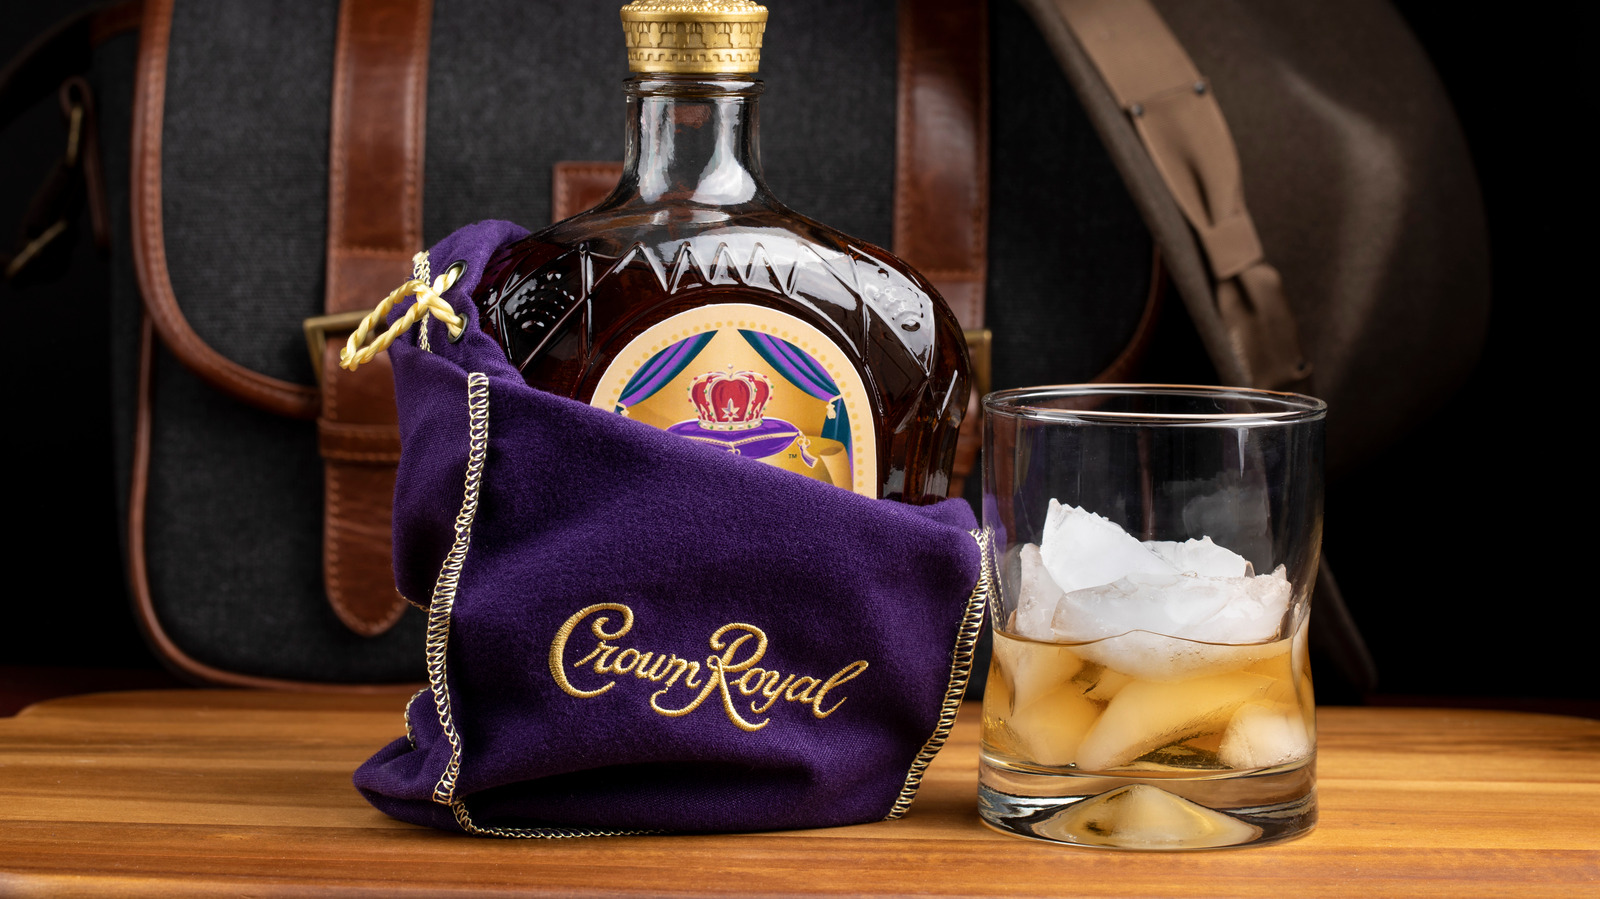 Did Canada Really Create All The Foods In The Crown Royal Super Bowl